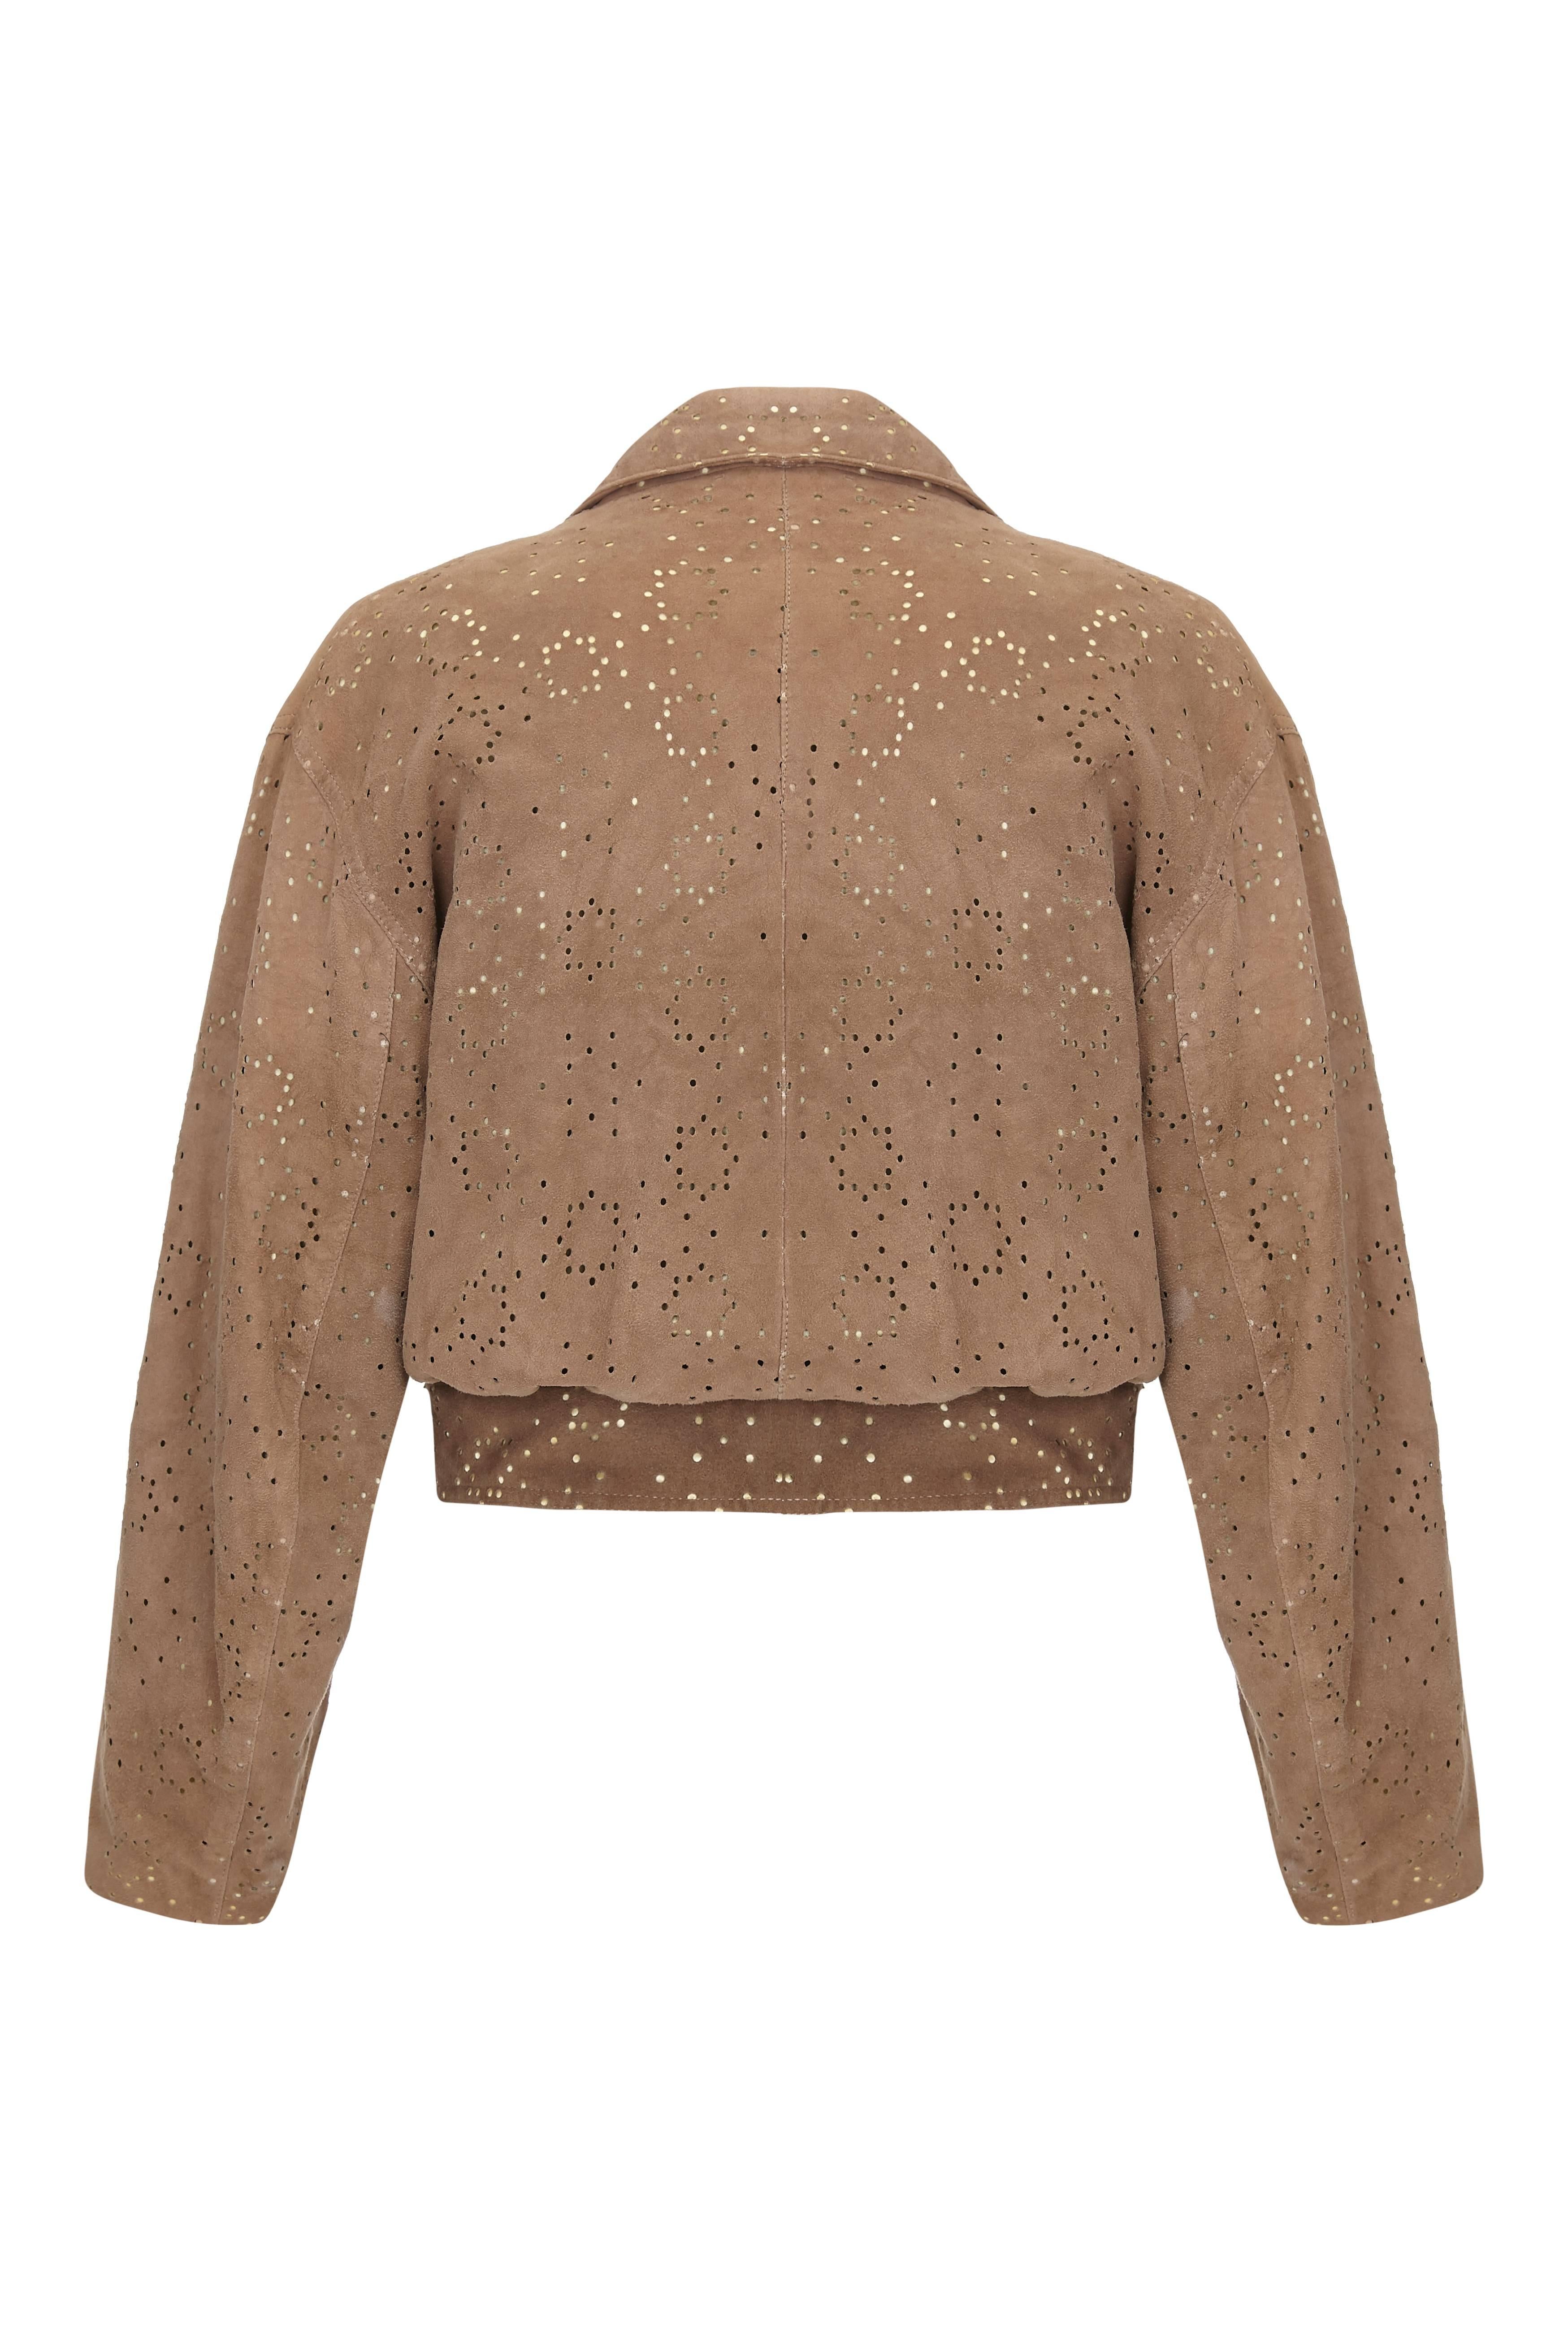 This desirable tawny lamb skin jacket with laser cut detail is by French designer Alaïa and is in superb vintage condition. A documented runway piece from his spring / summer 1989 collection, Alaïa established his ready to wear label in 1980 having